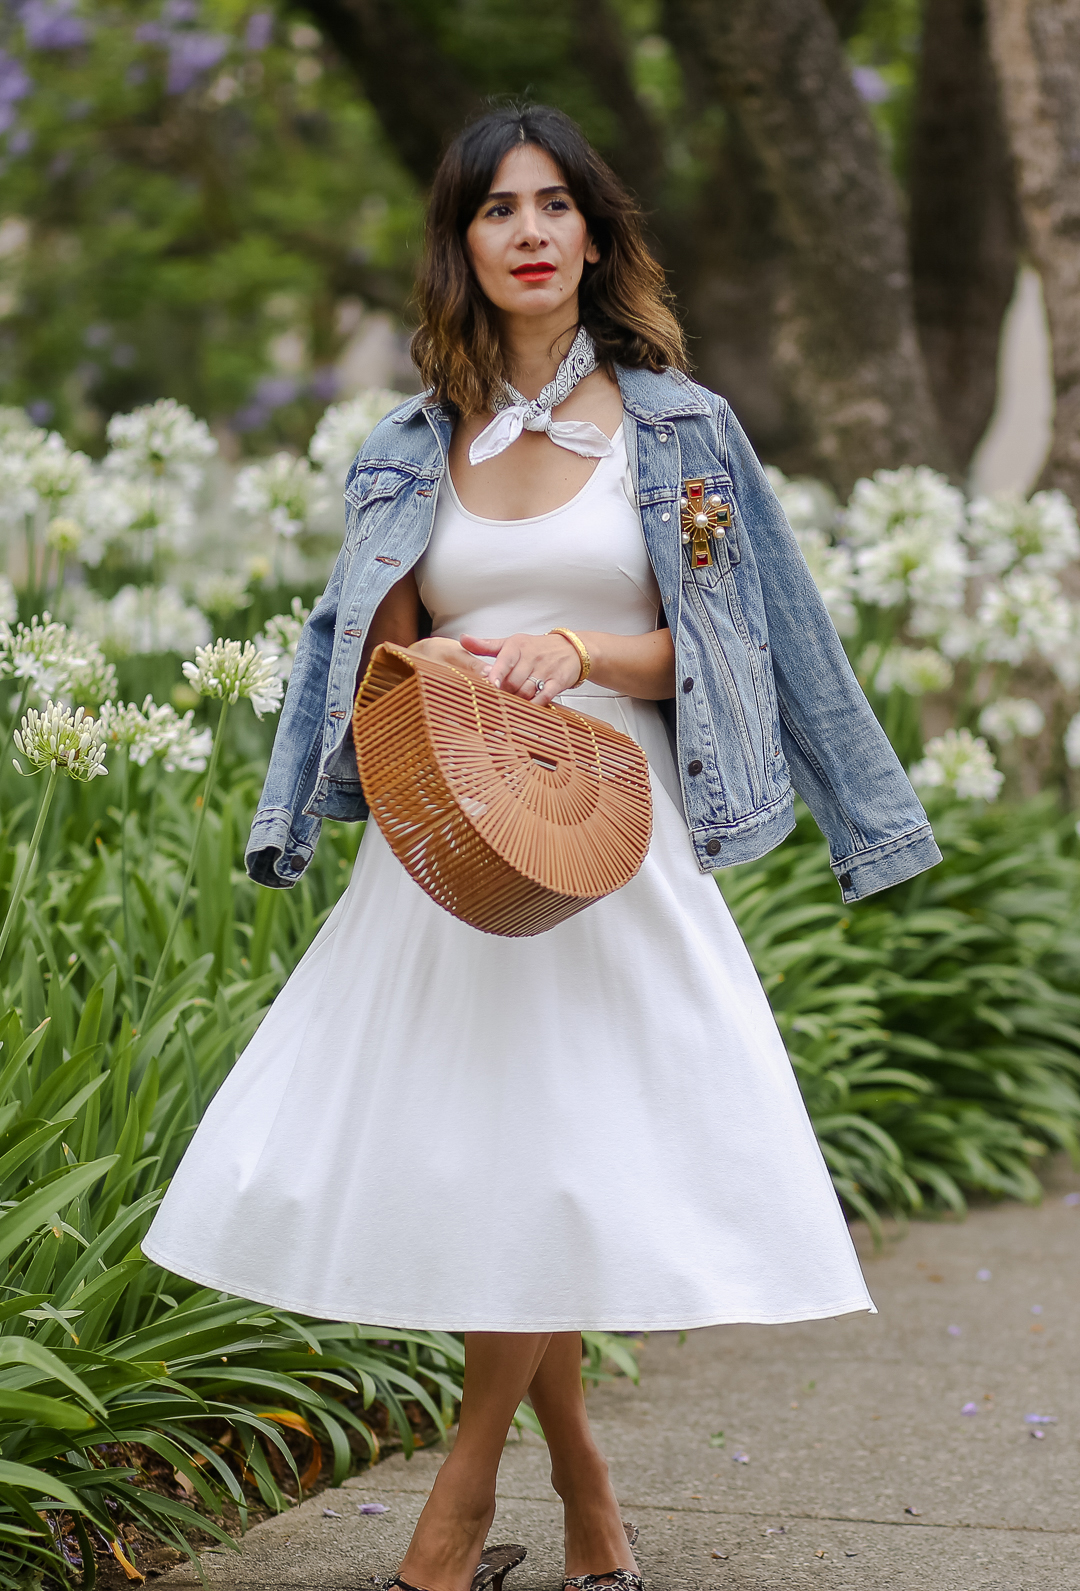 white dress and denim jacket outfit